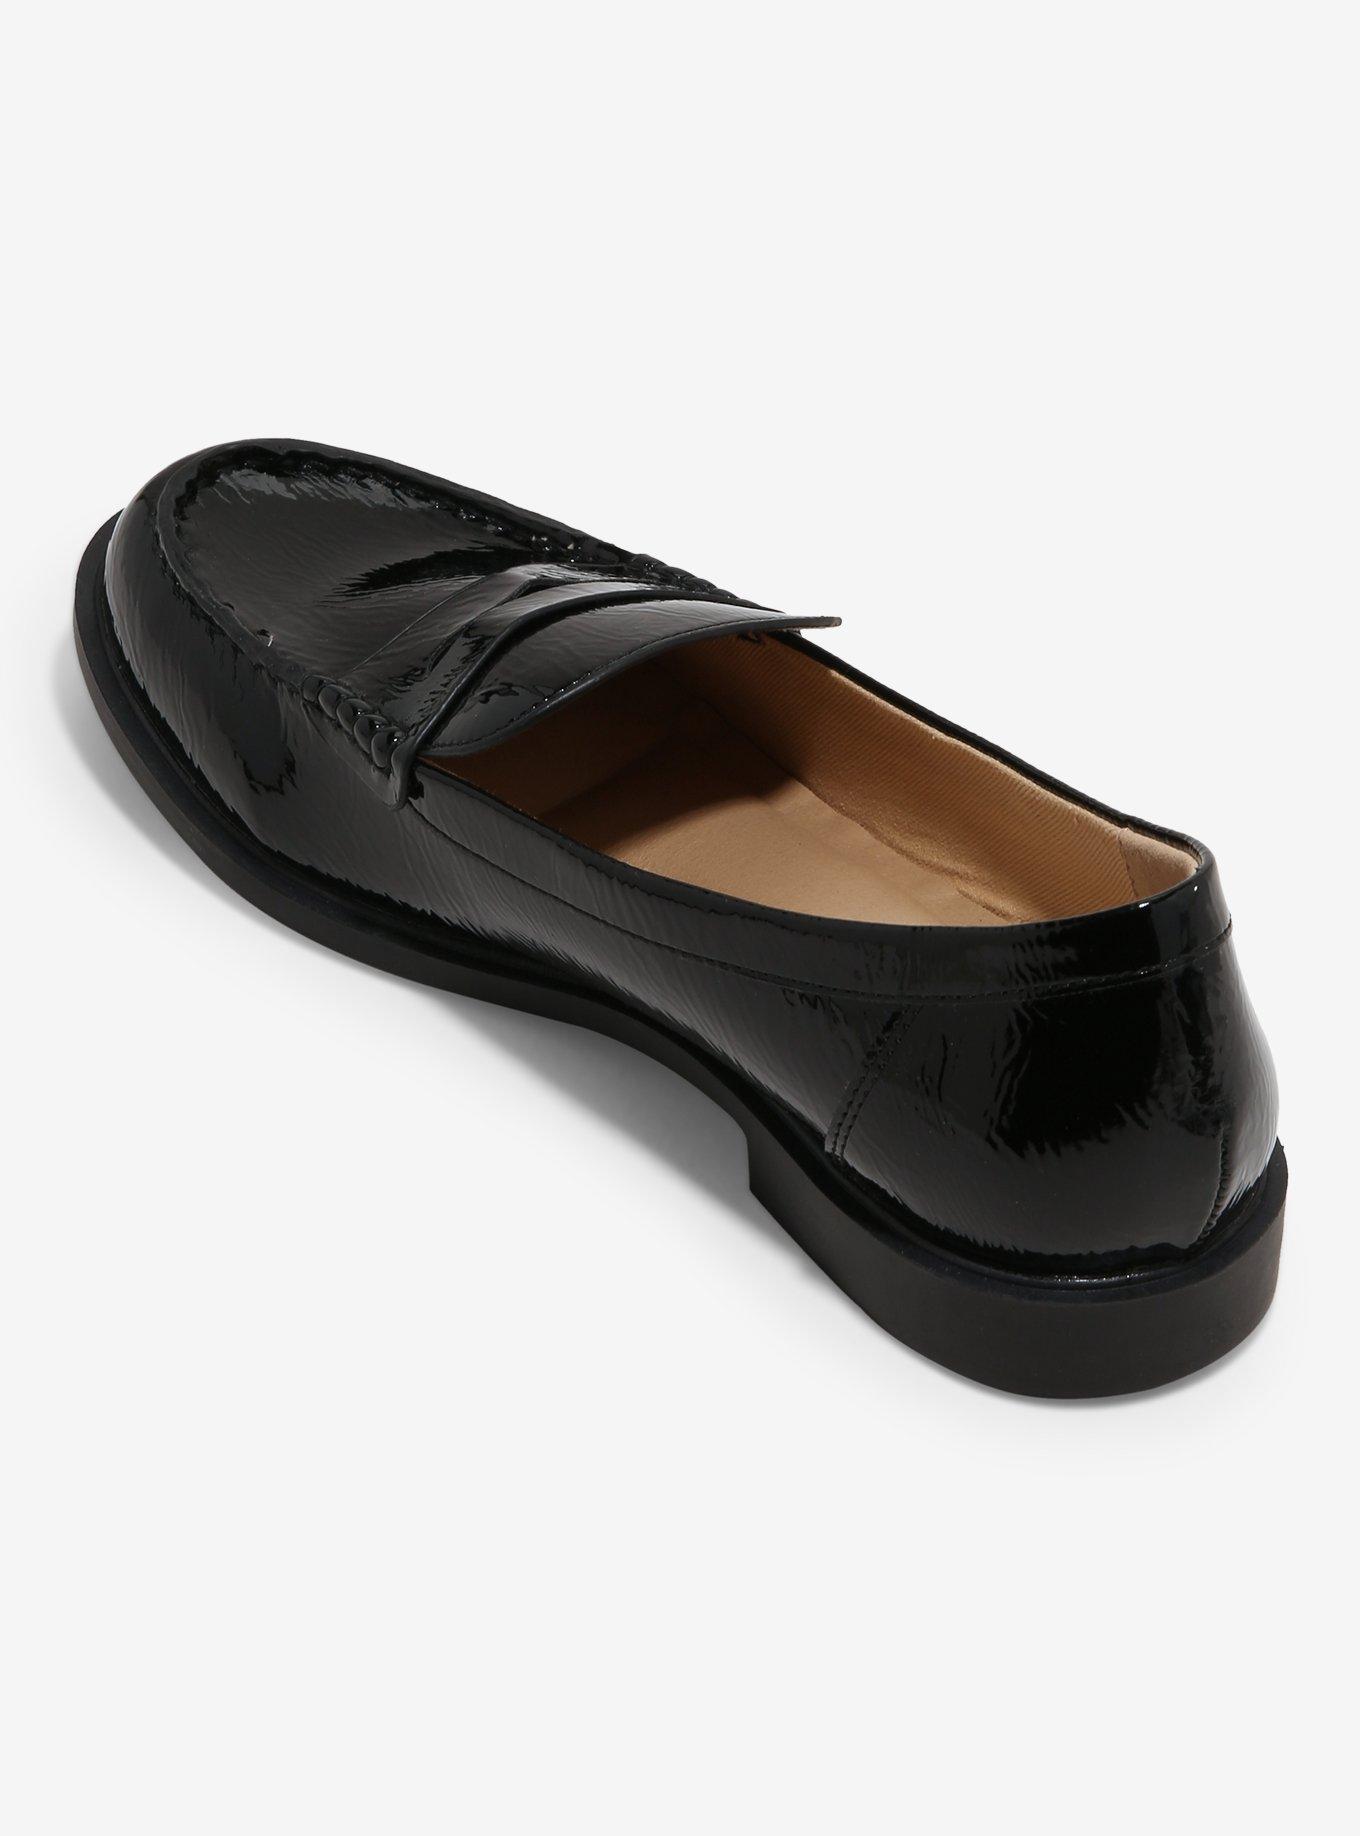 Chinese Laundry Black Patent Loafers, MULTI, alternate